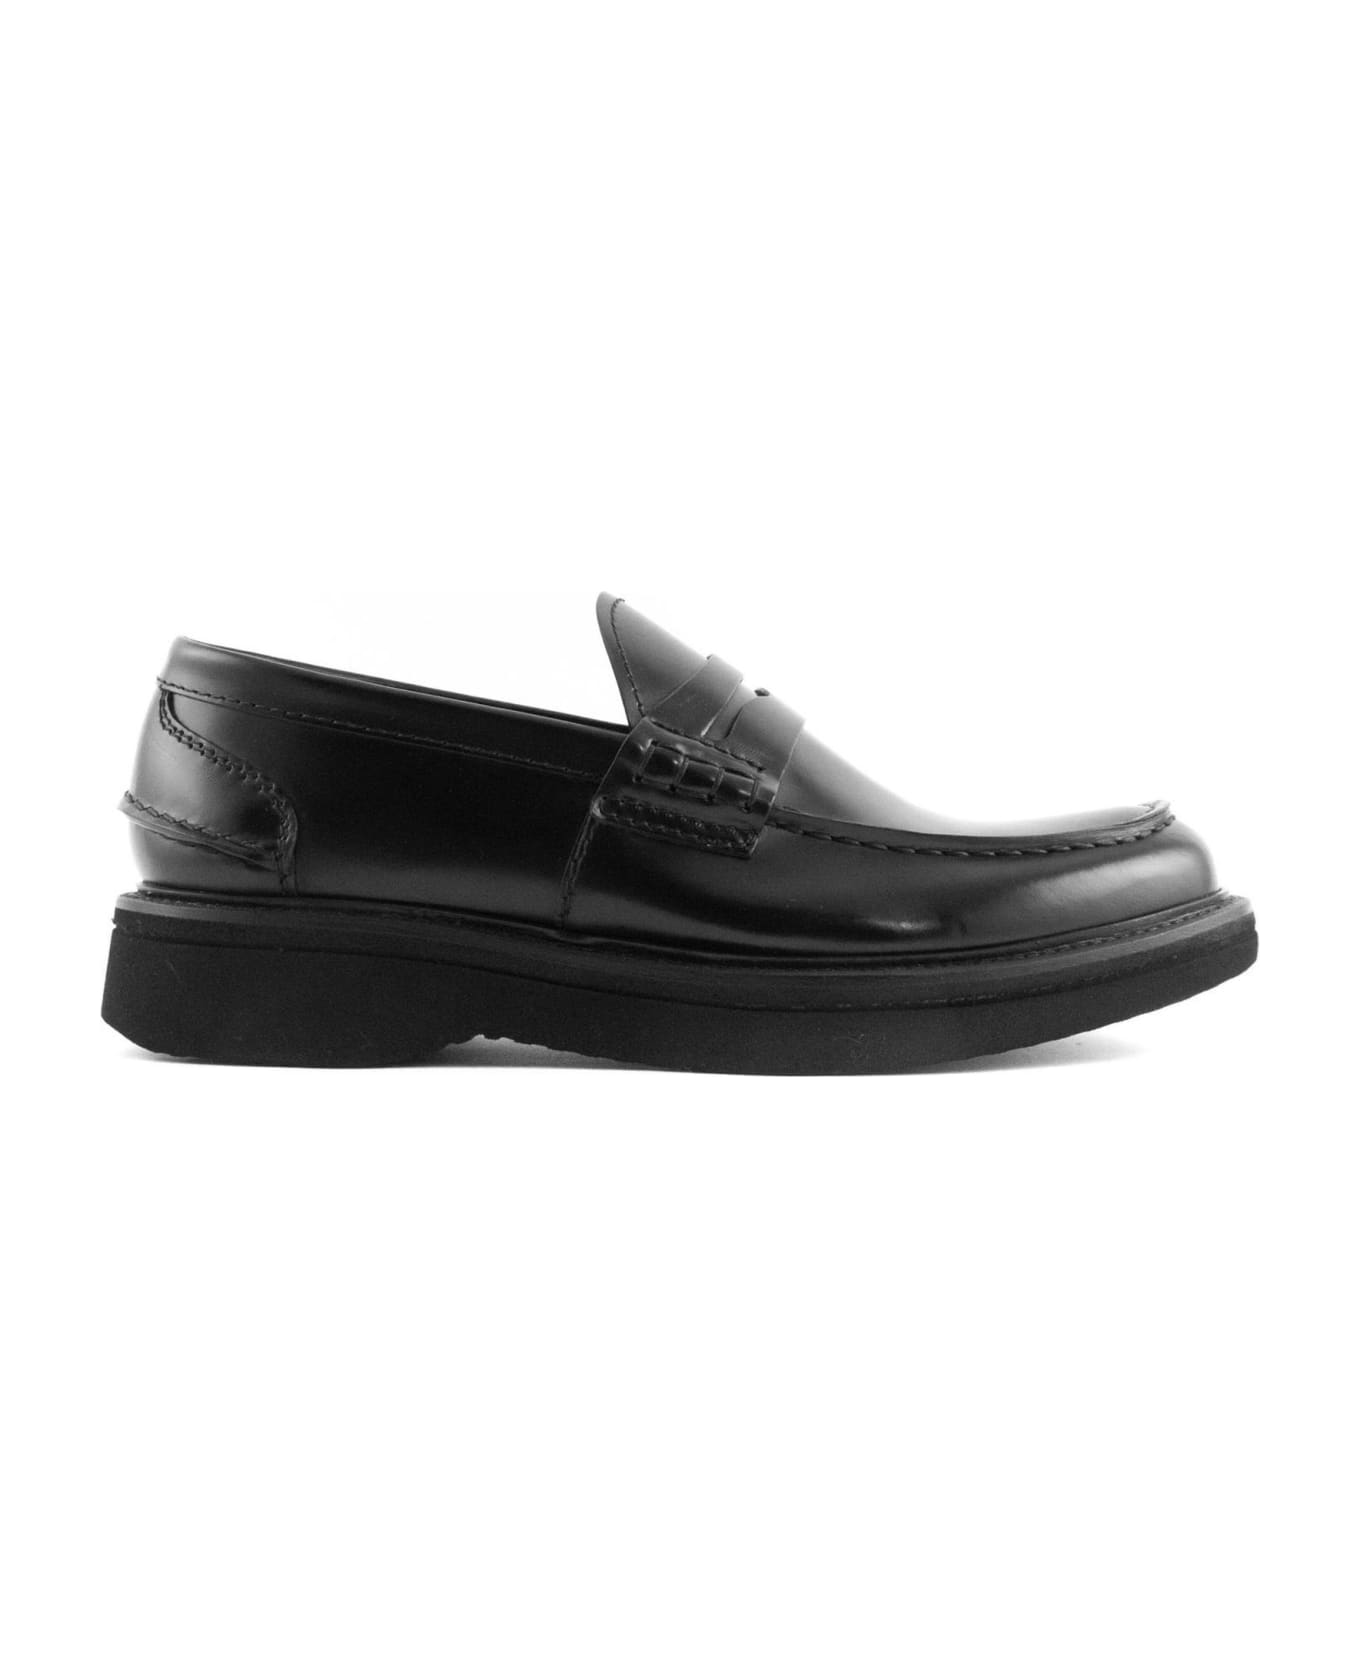 Green George Black Brushed Leather Loafer - Black ローファー＆デッキシューズ